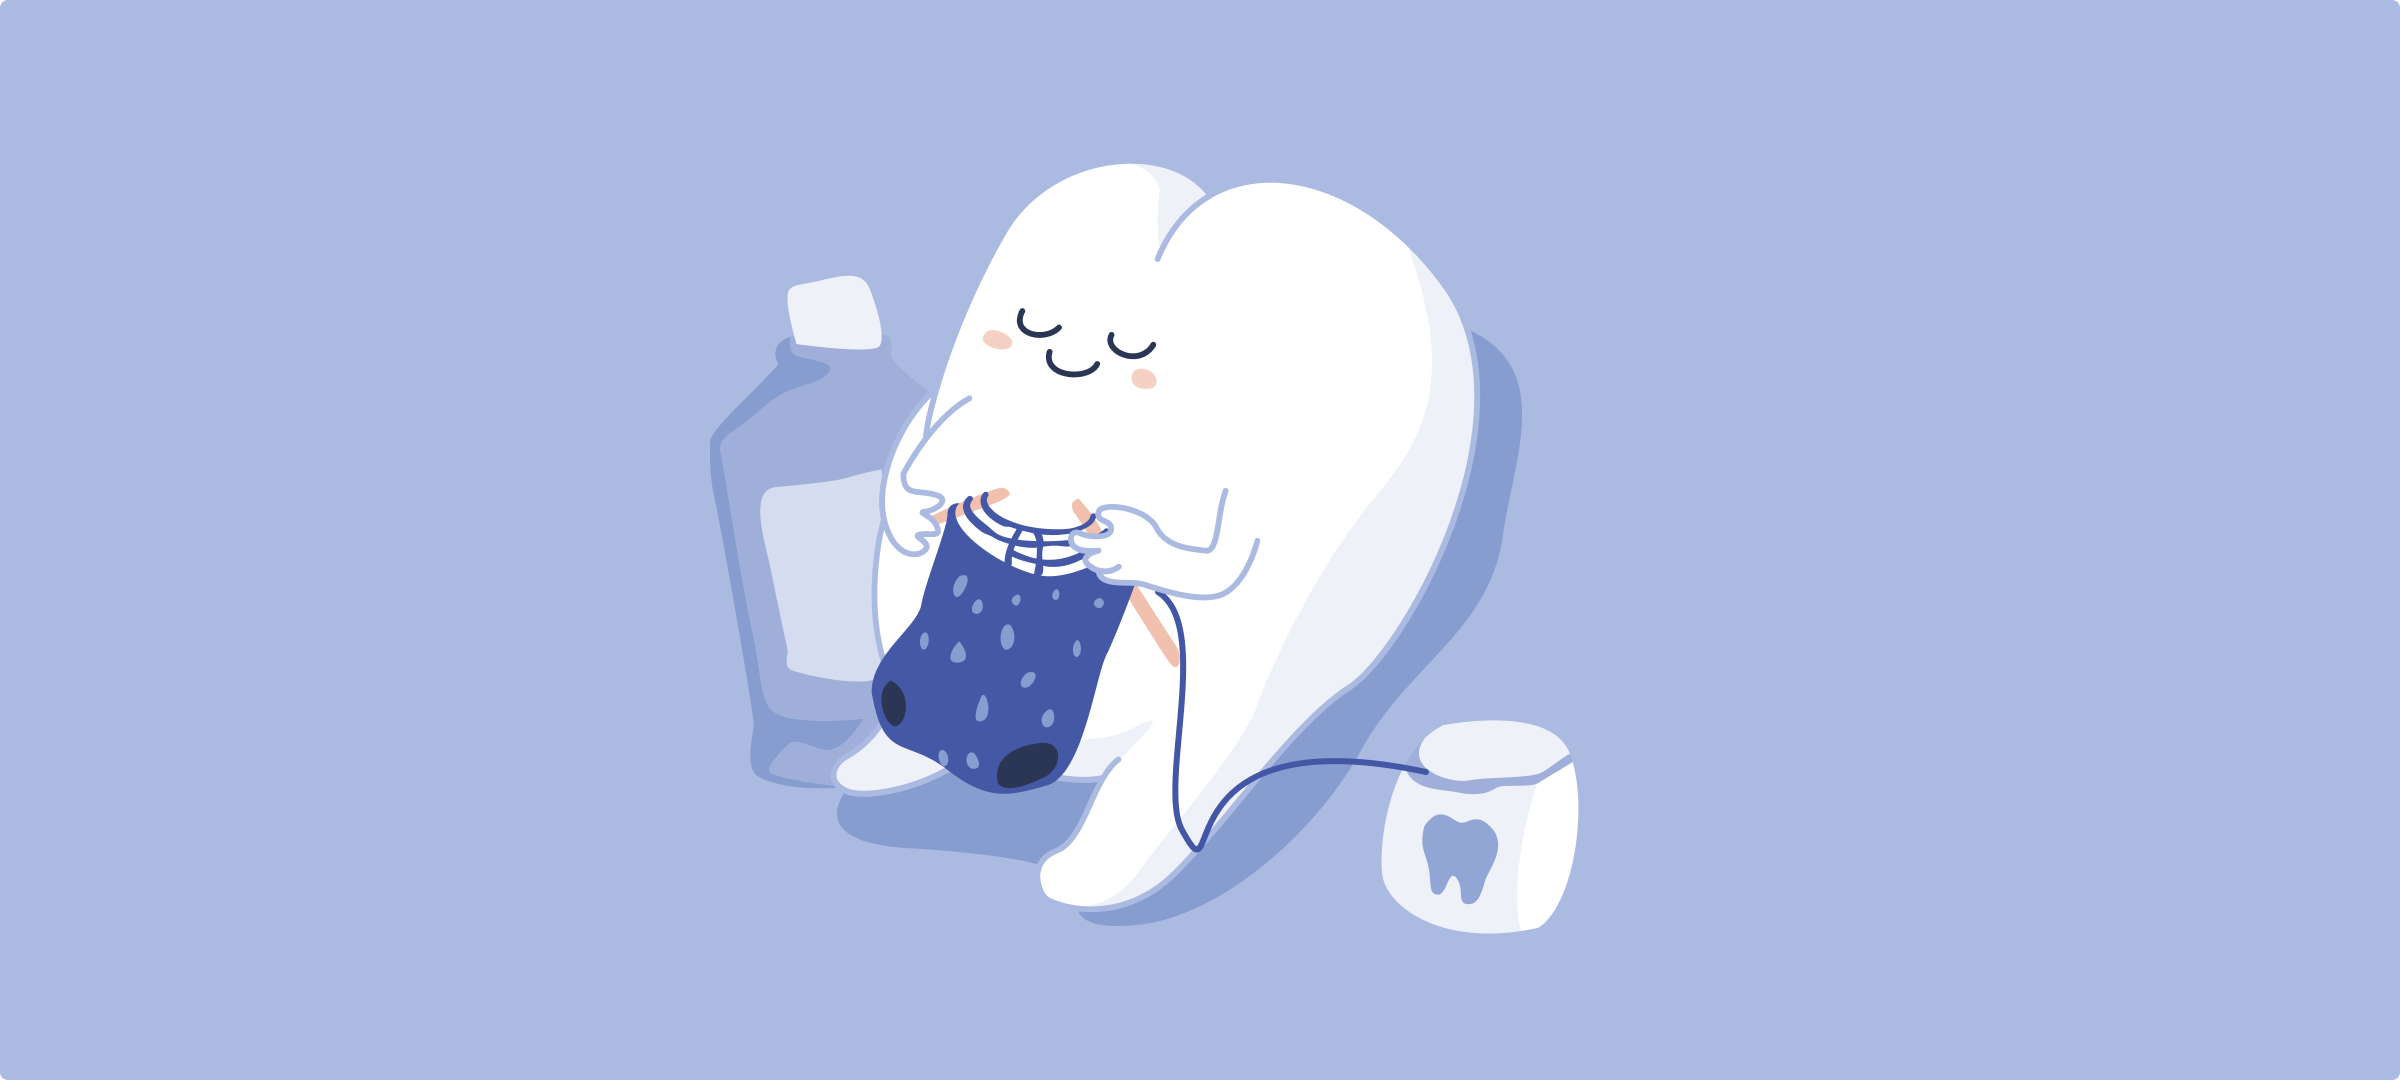 The pearlii mascot sewing a baby dress with dental floss